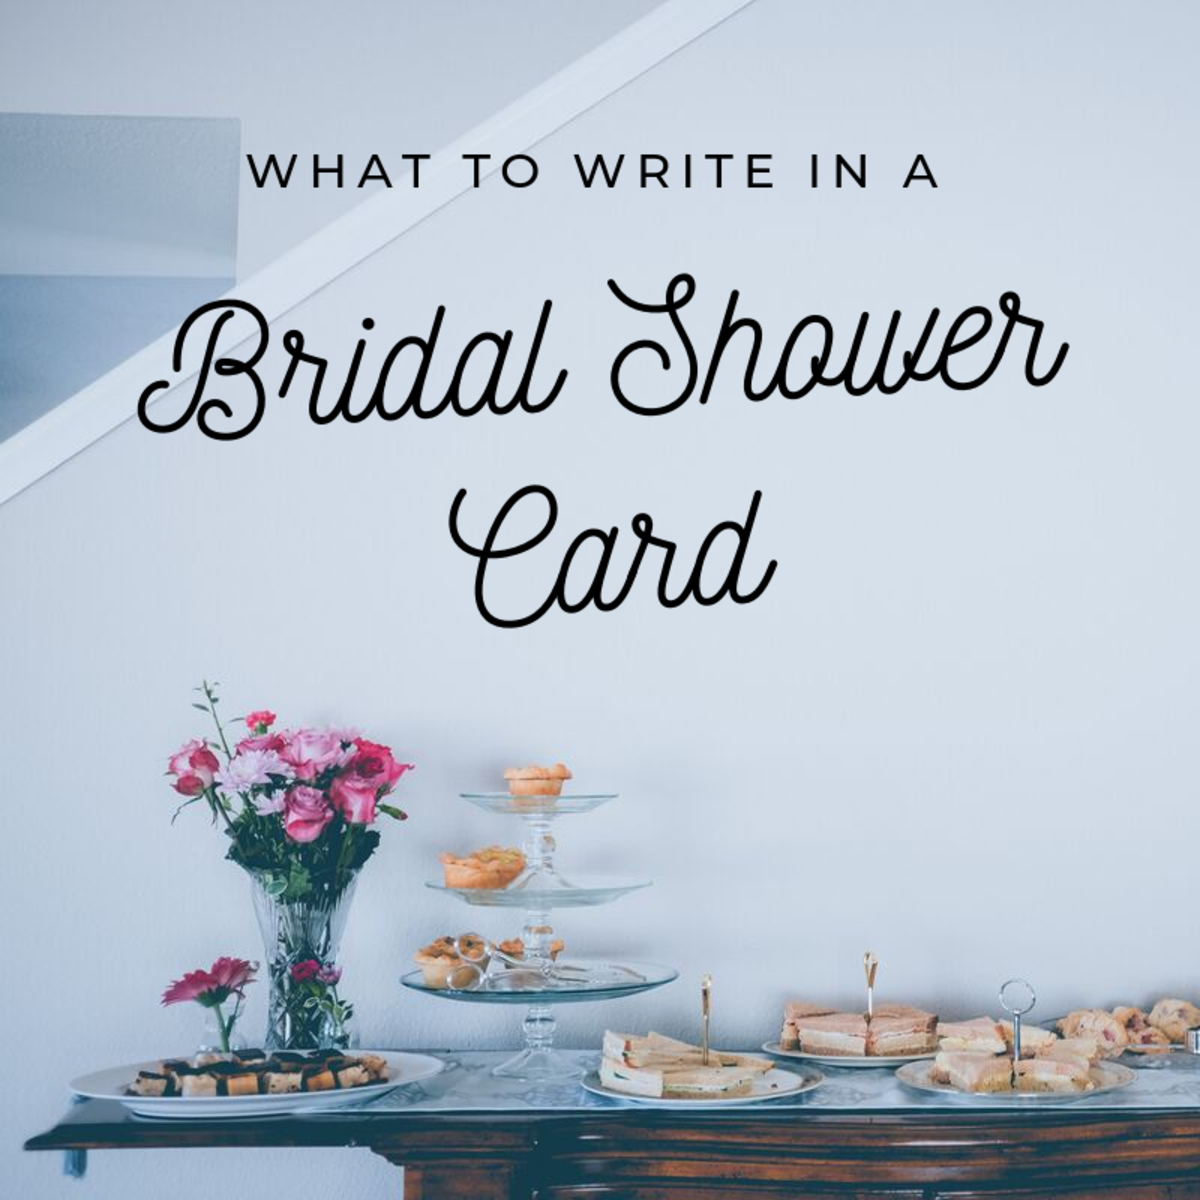 bridal-shower-card-messages-what-to-write-zola-expert-wedding-advice-wedding-shower-cards